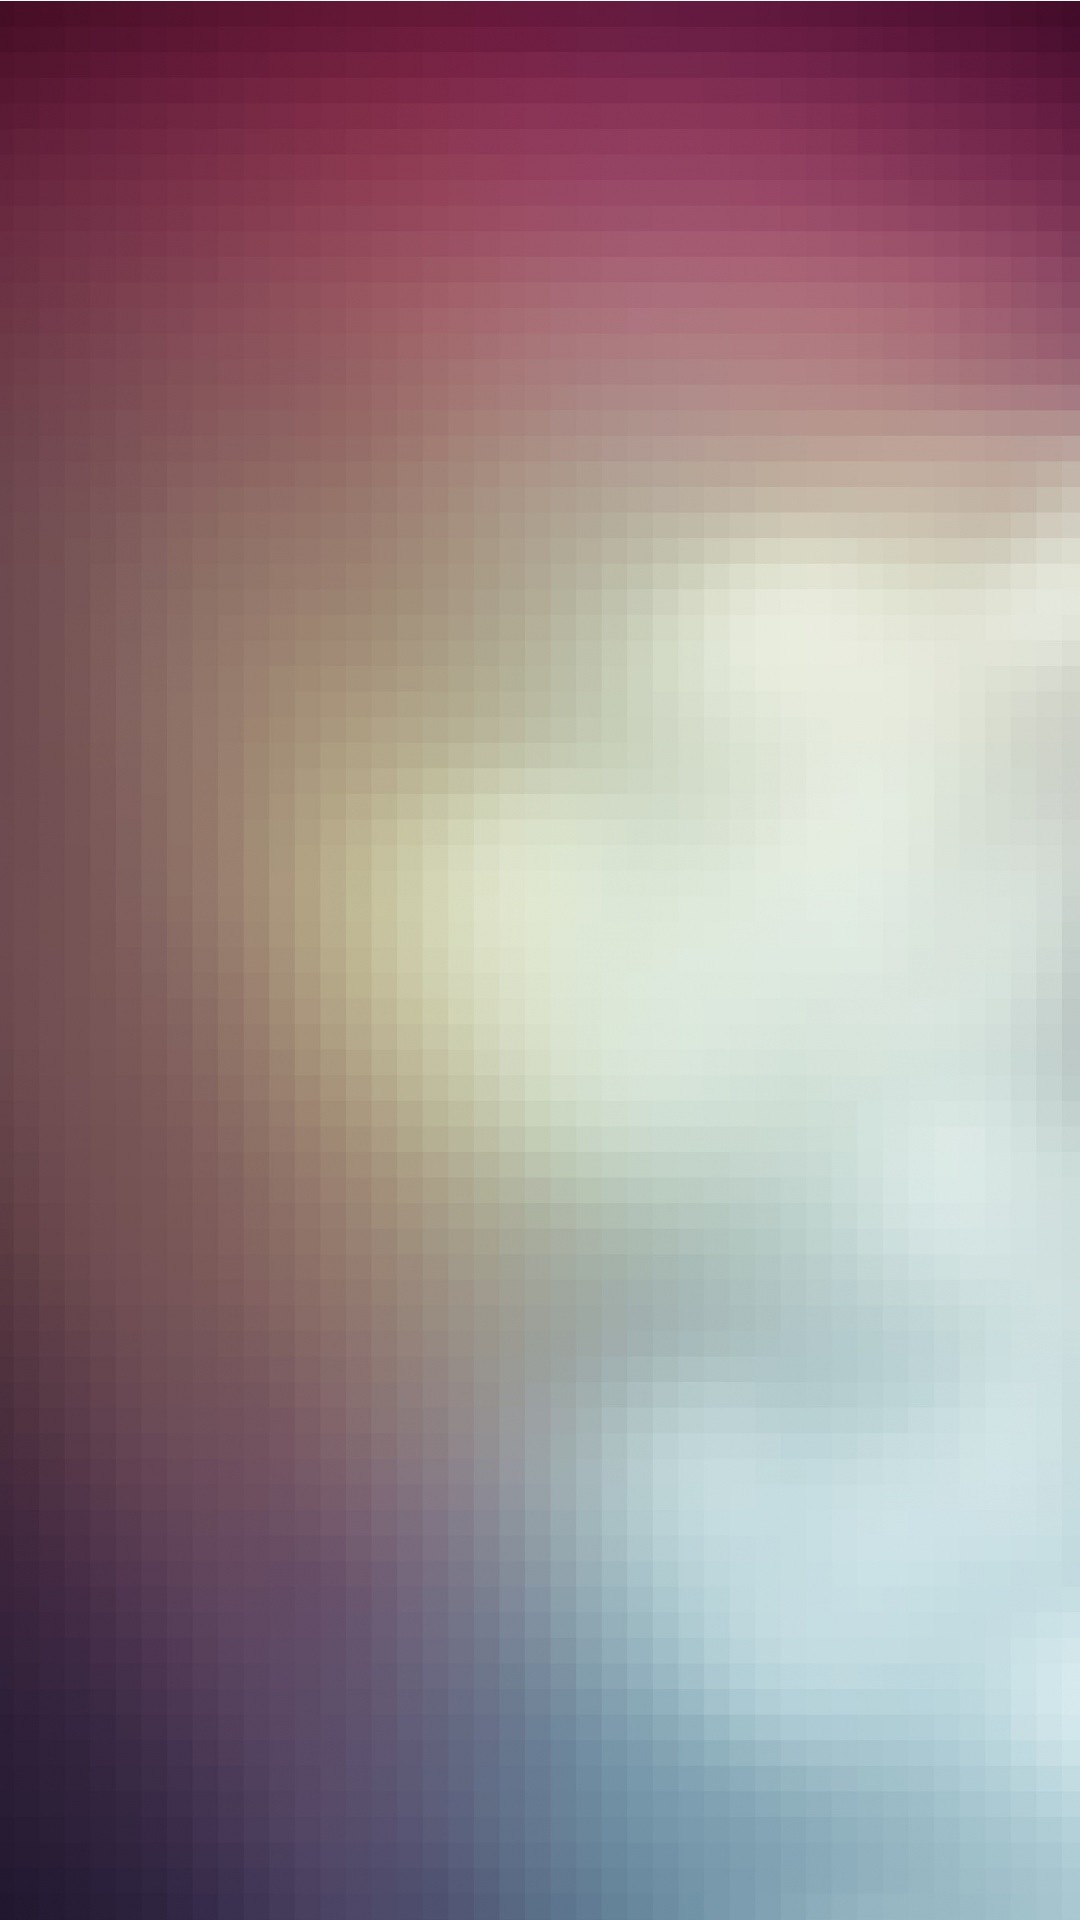 1080x1920 Cool Blurry Pixel Background. 18 Calming blurred lights and gradients  wallpapers for iPhone - @